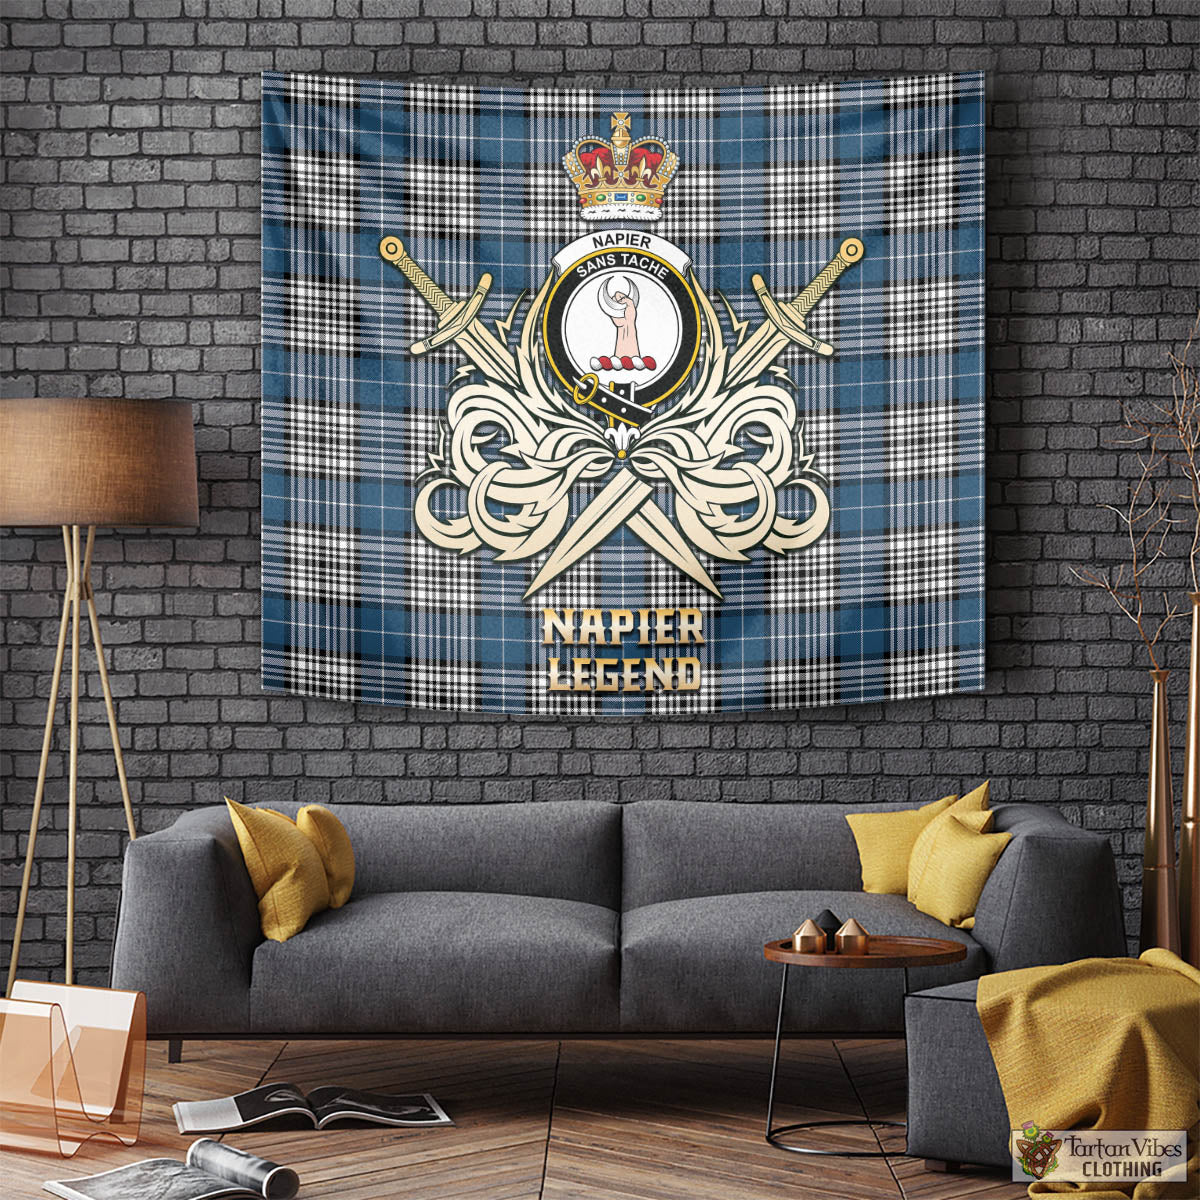 Tartan Vibes Clothing Napier Modern Tartan Tapestry with Clan Crest and the Golden Sword of Courageous Legacy